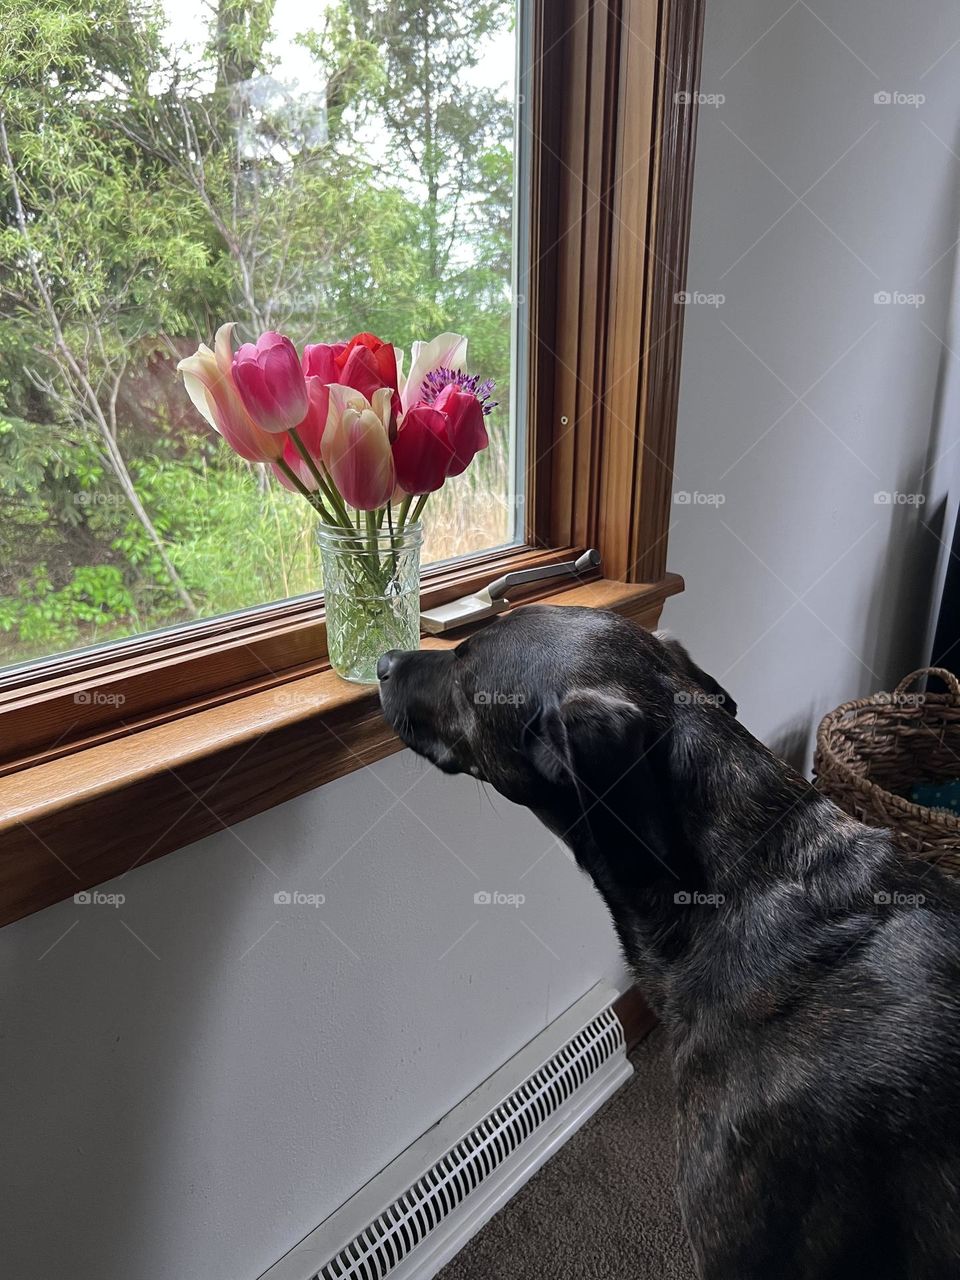 Dog taking a minute to smell the tulips